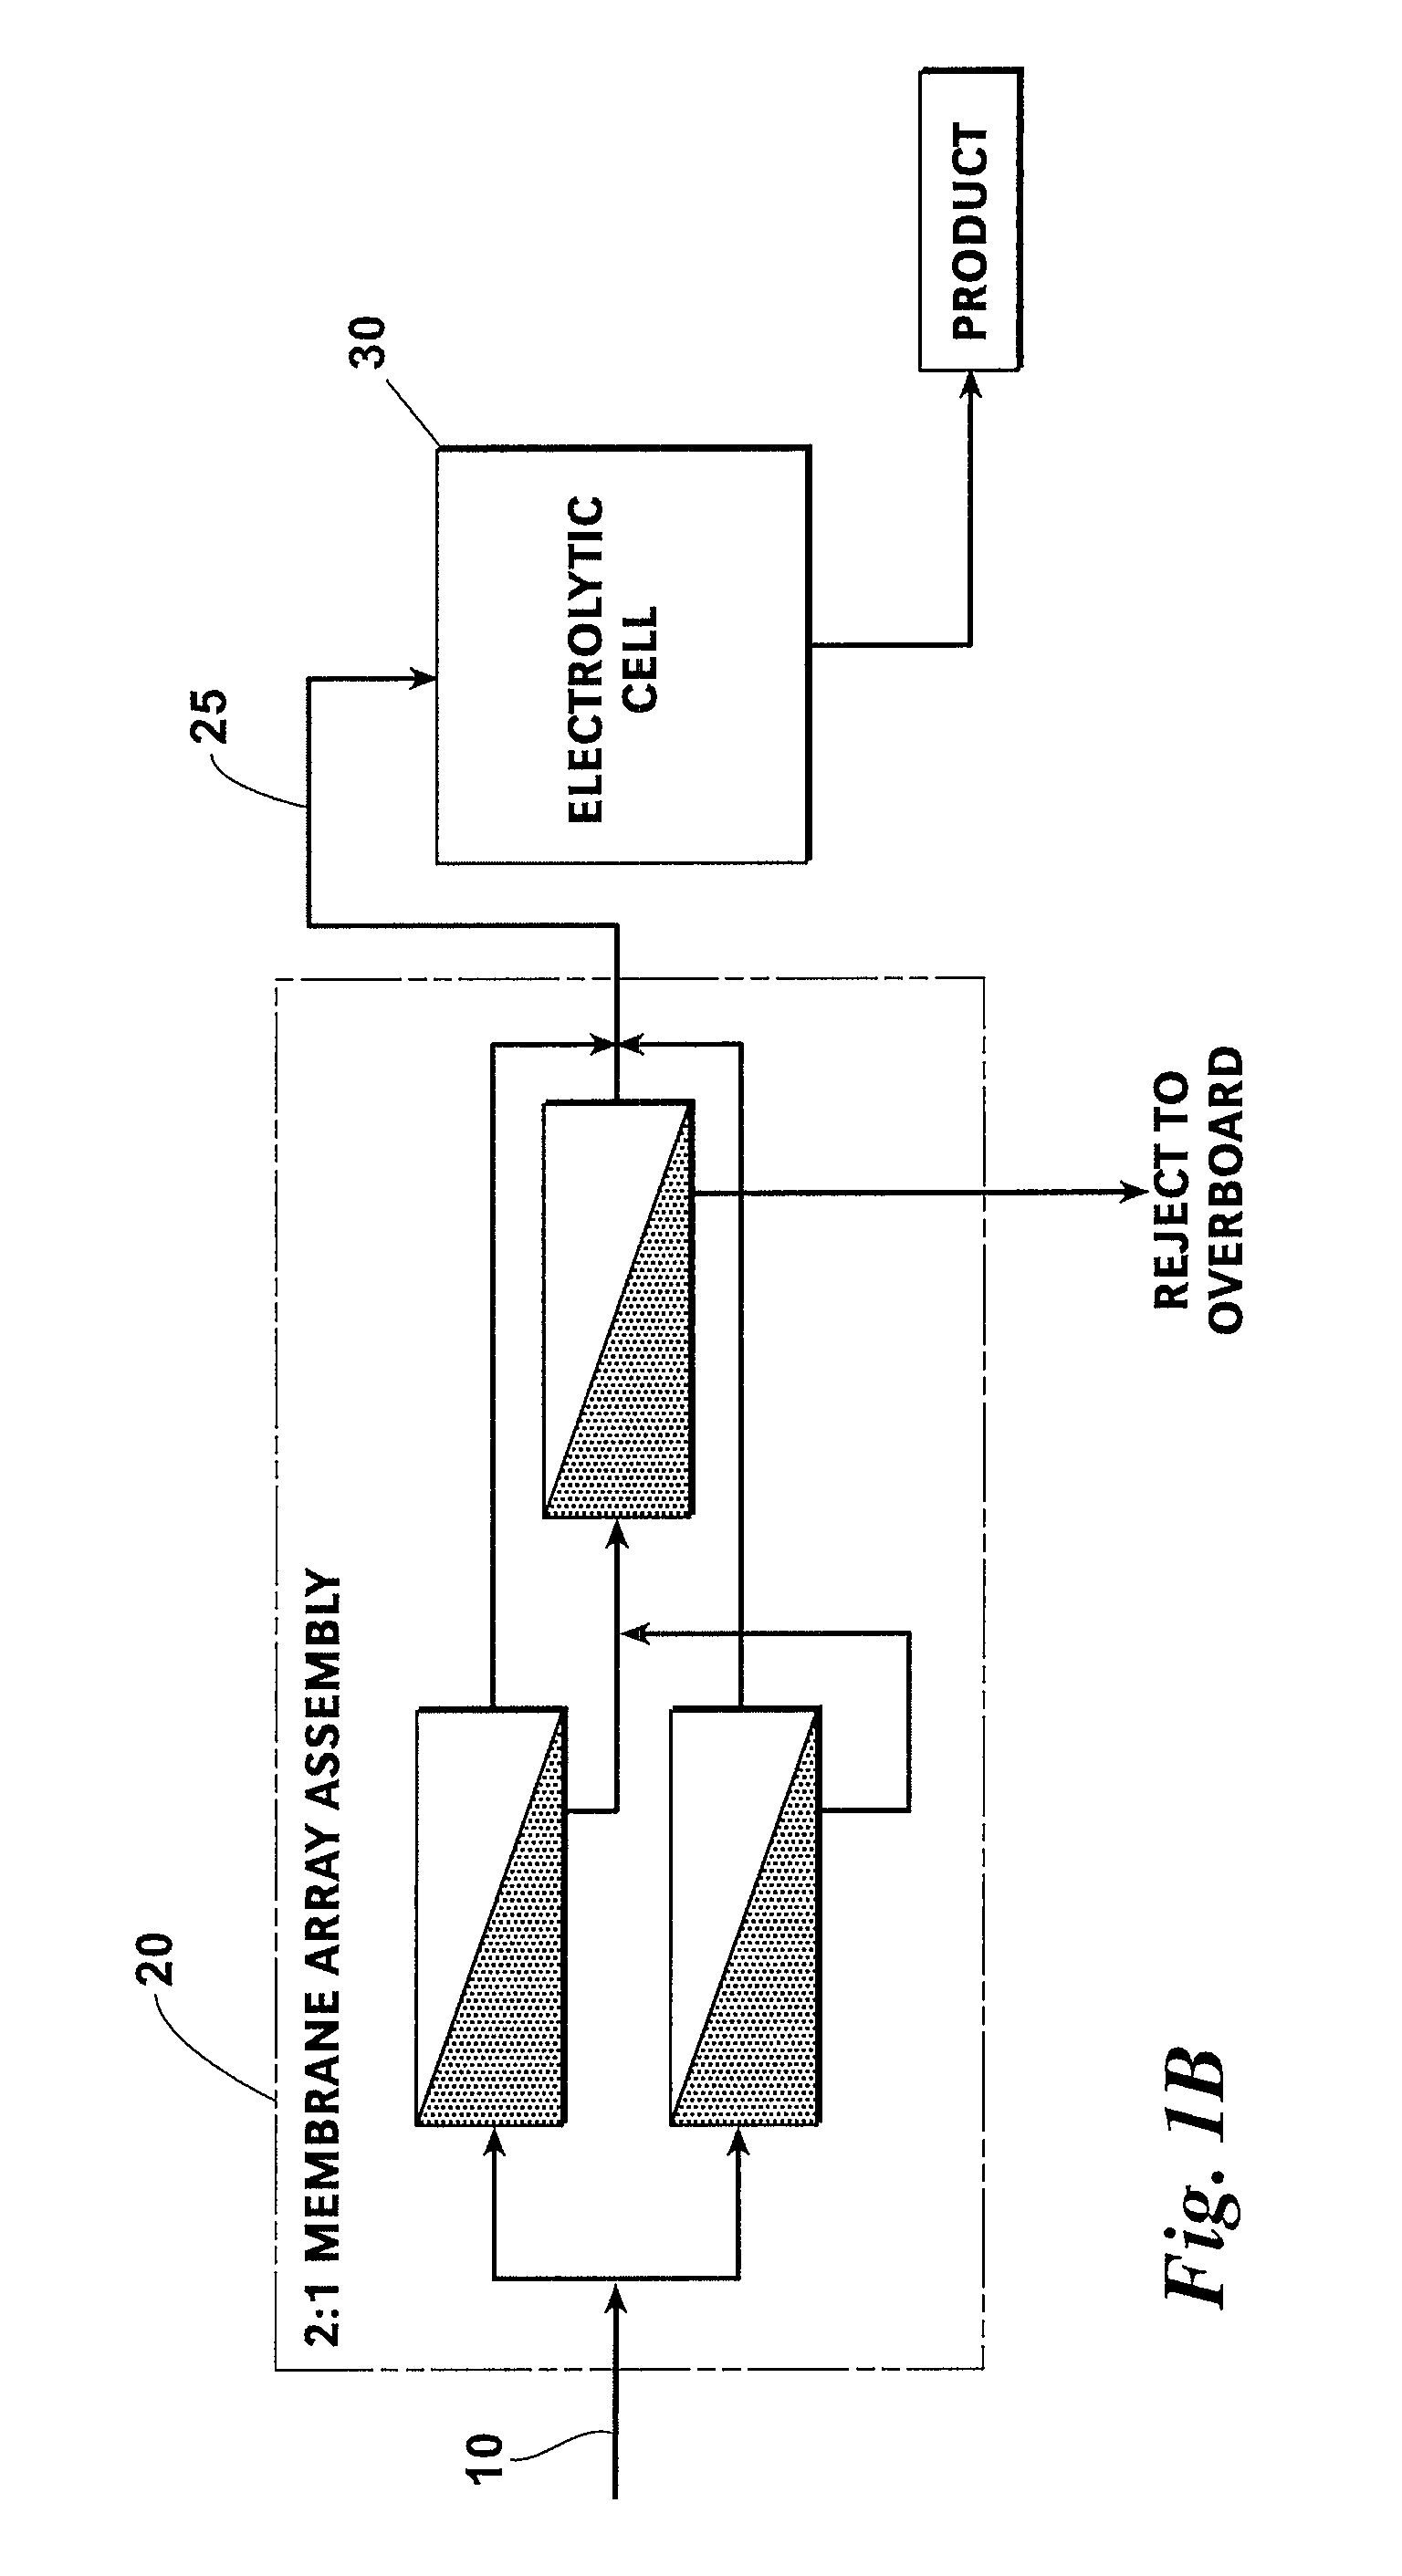 System and Method For Treating A Saline Feed Stream To An Electro-Chlorination Unit